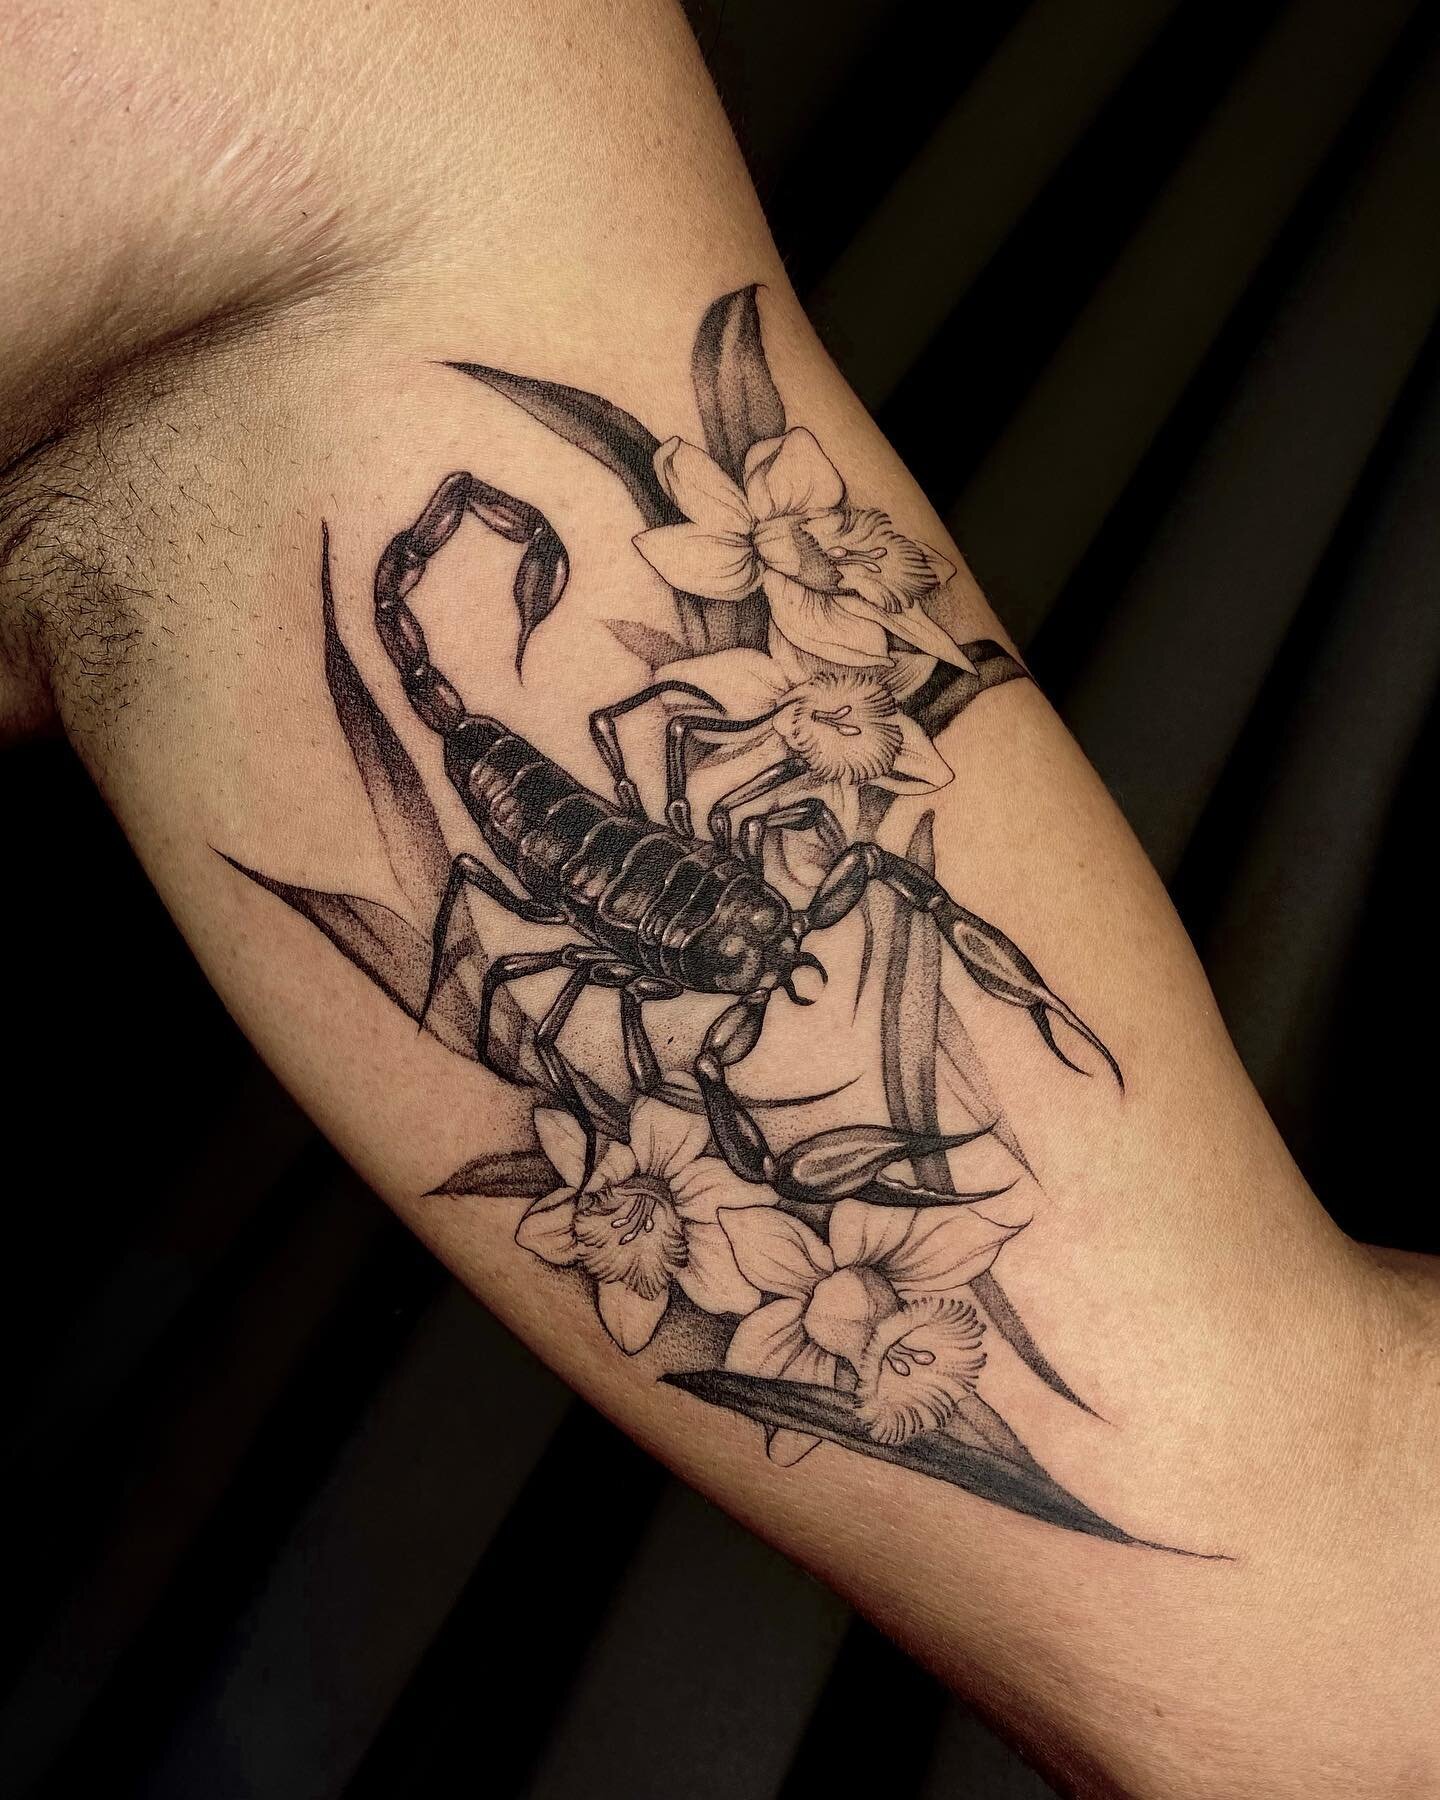 Scorpion and flowers 🦂thank you so much for making the trip!!